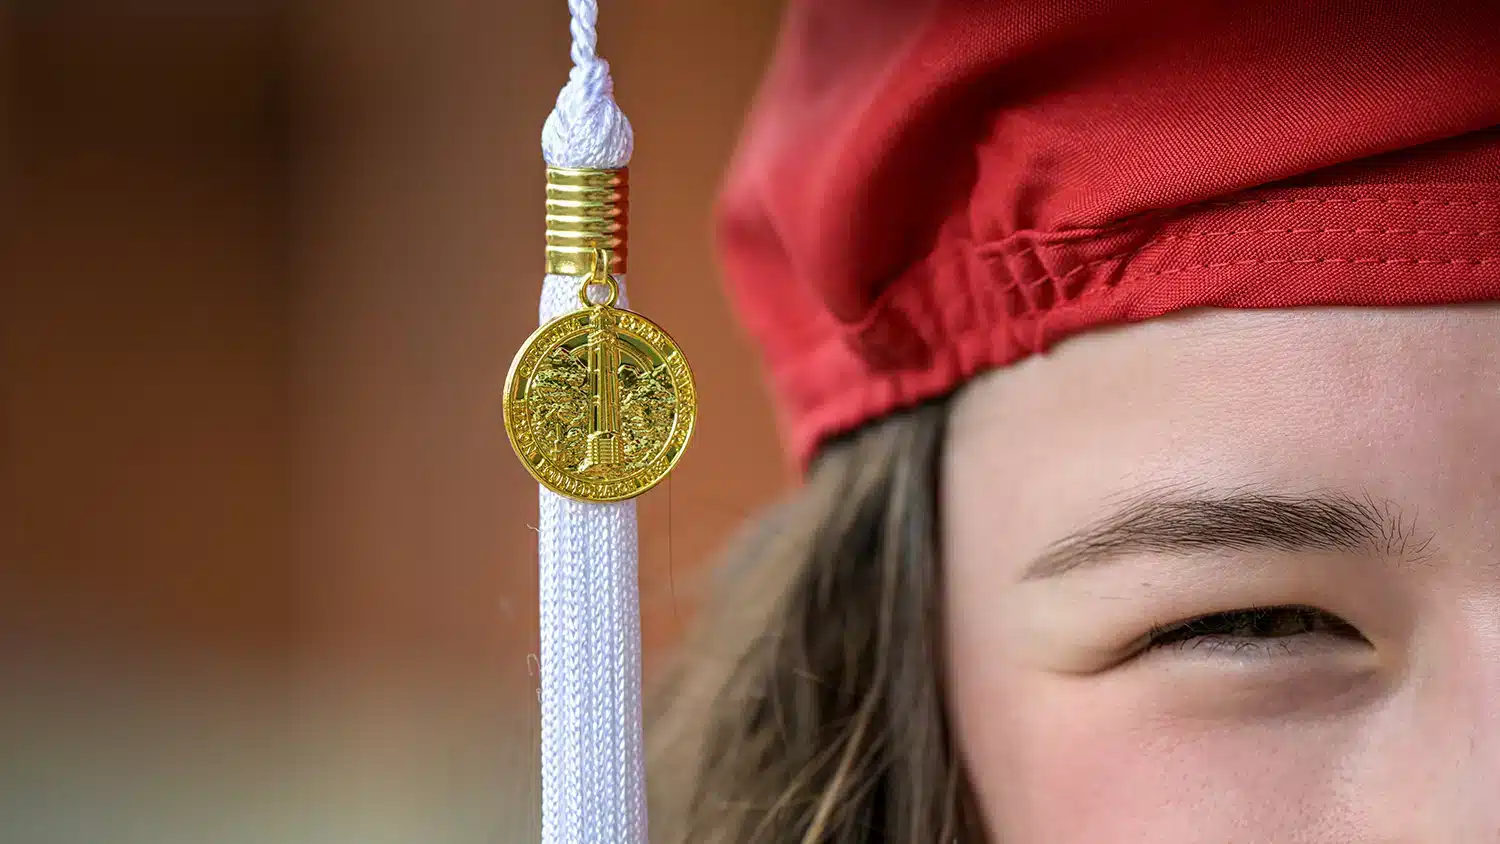 A student wearing a red graduation cap looks into the future.